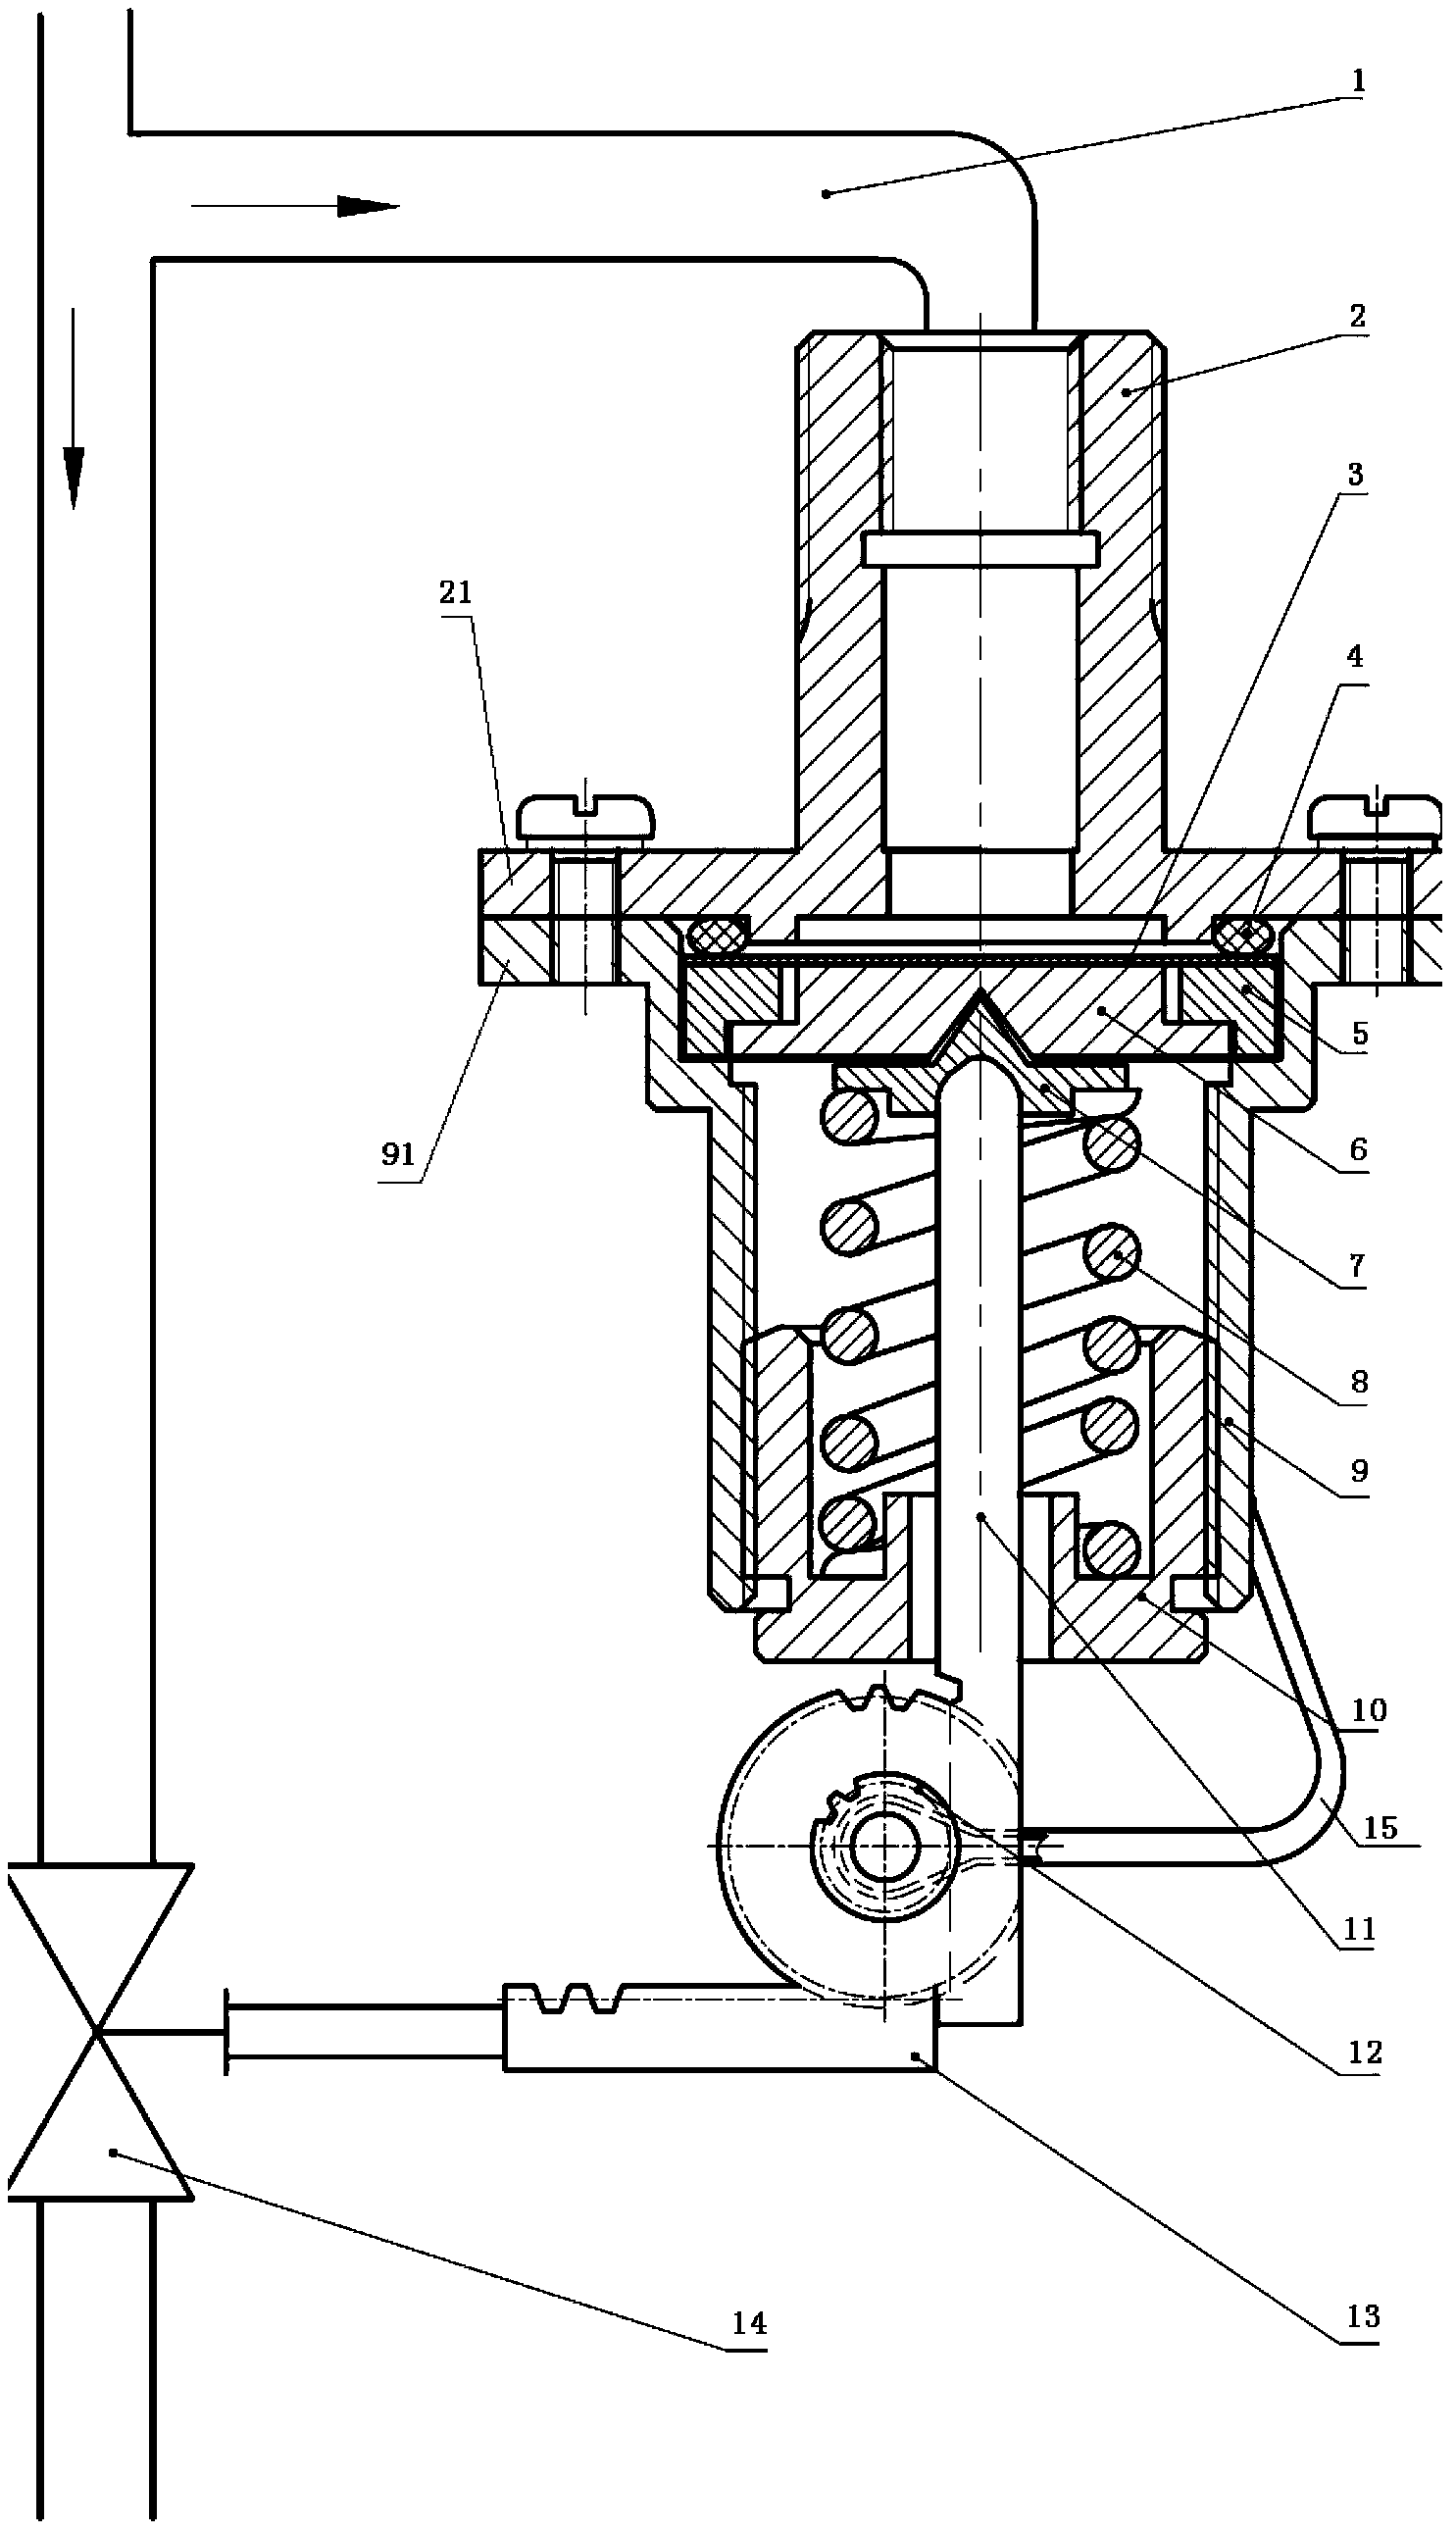 Mechanical pressure overload protector